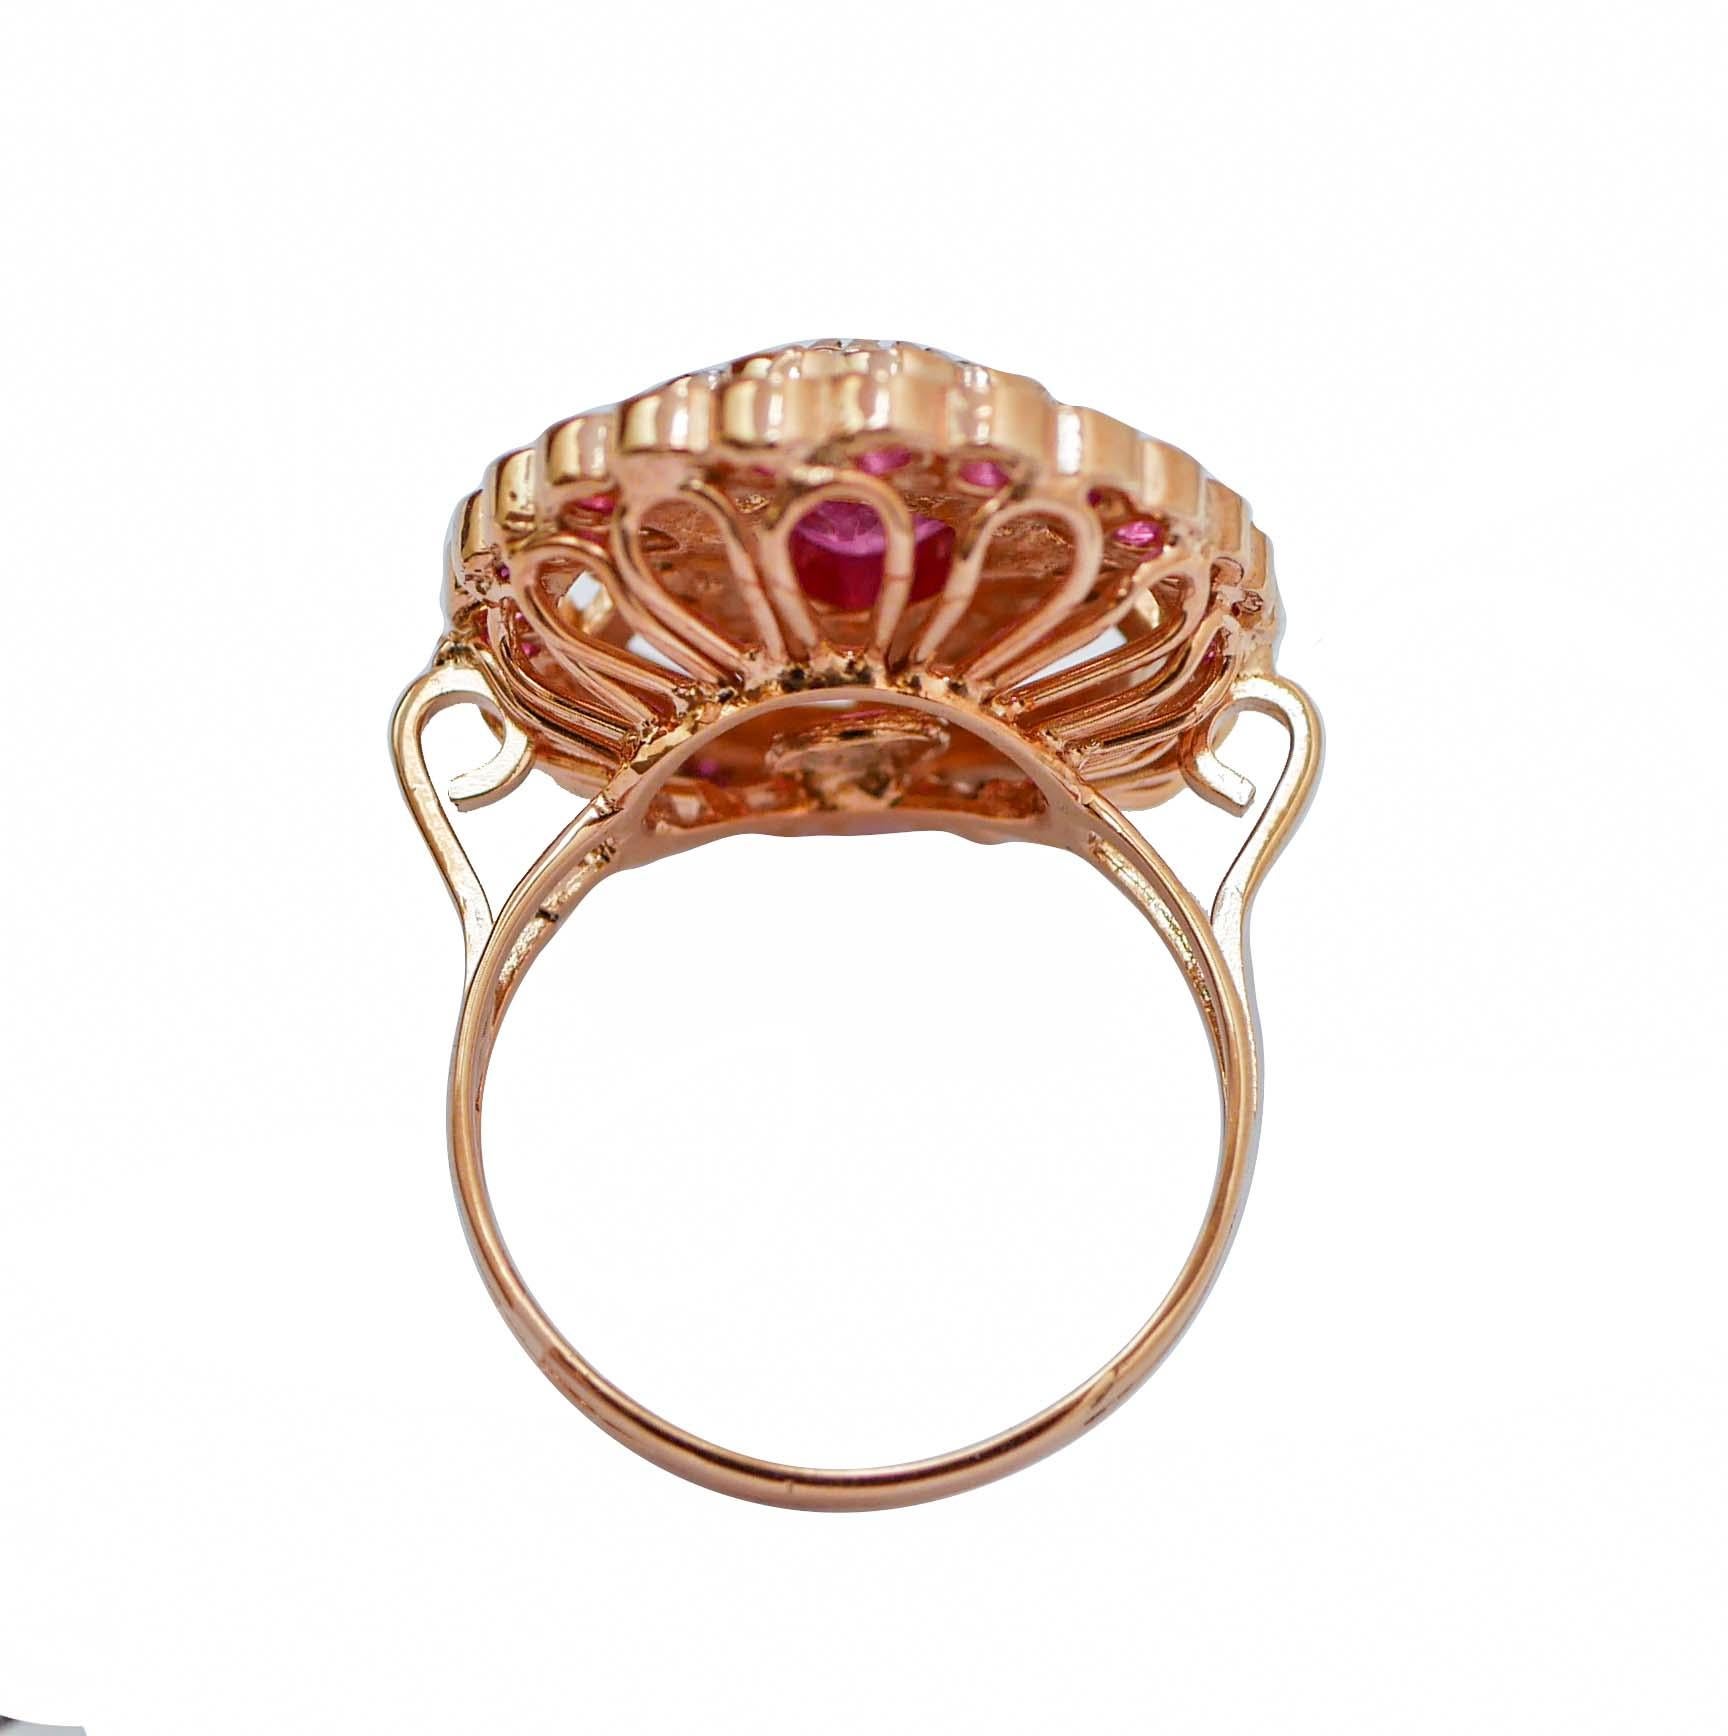 Retro Rubies, Diamonds, Rose Gold ad Silver Ring. For Sale